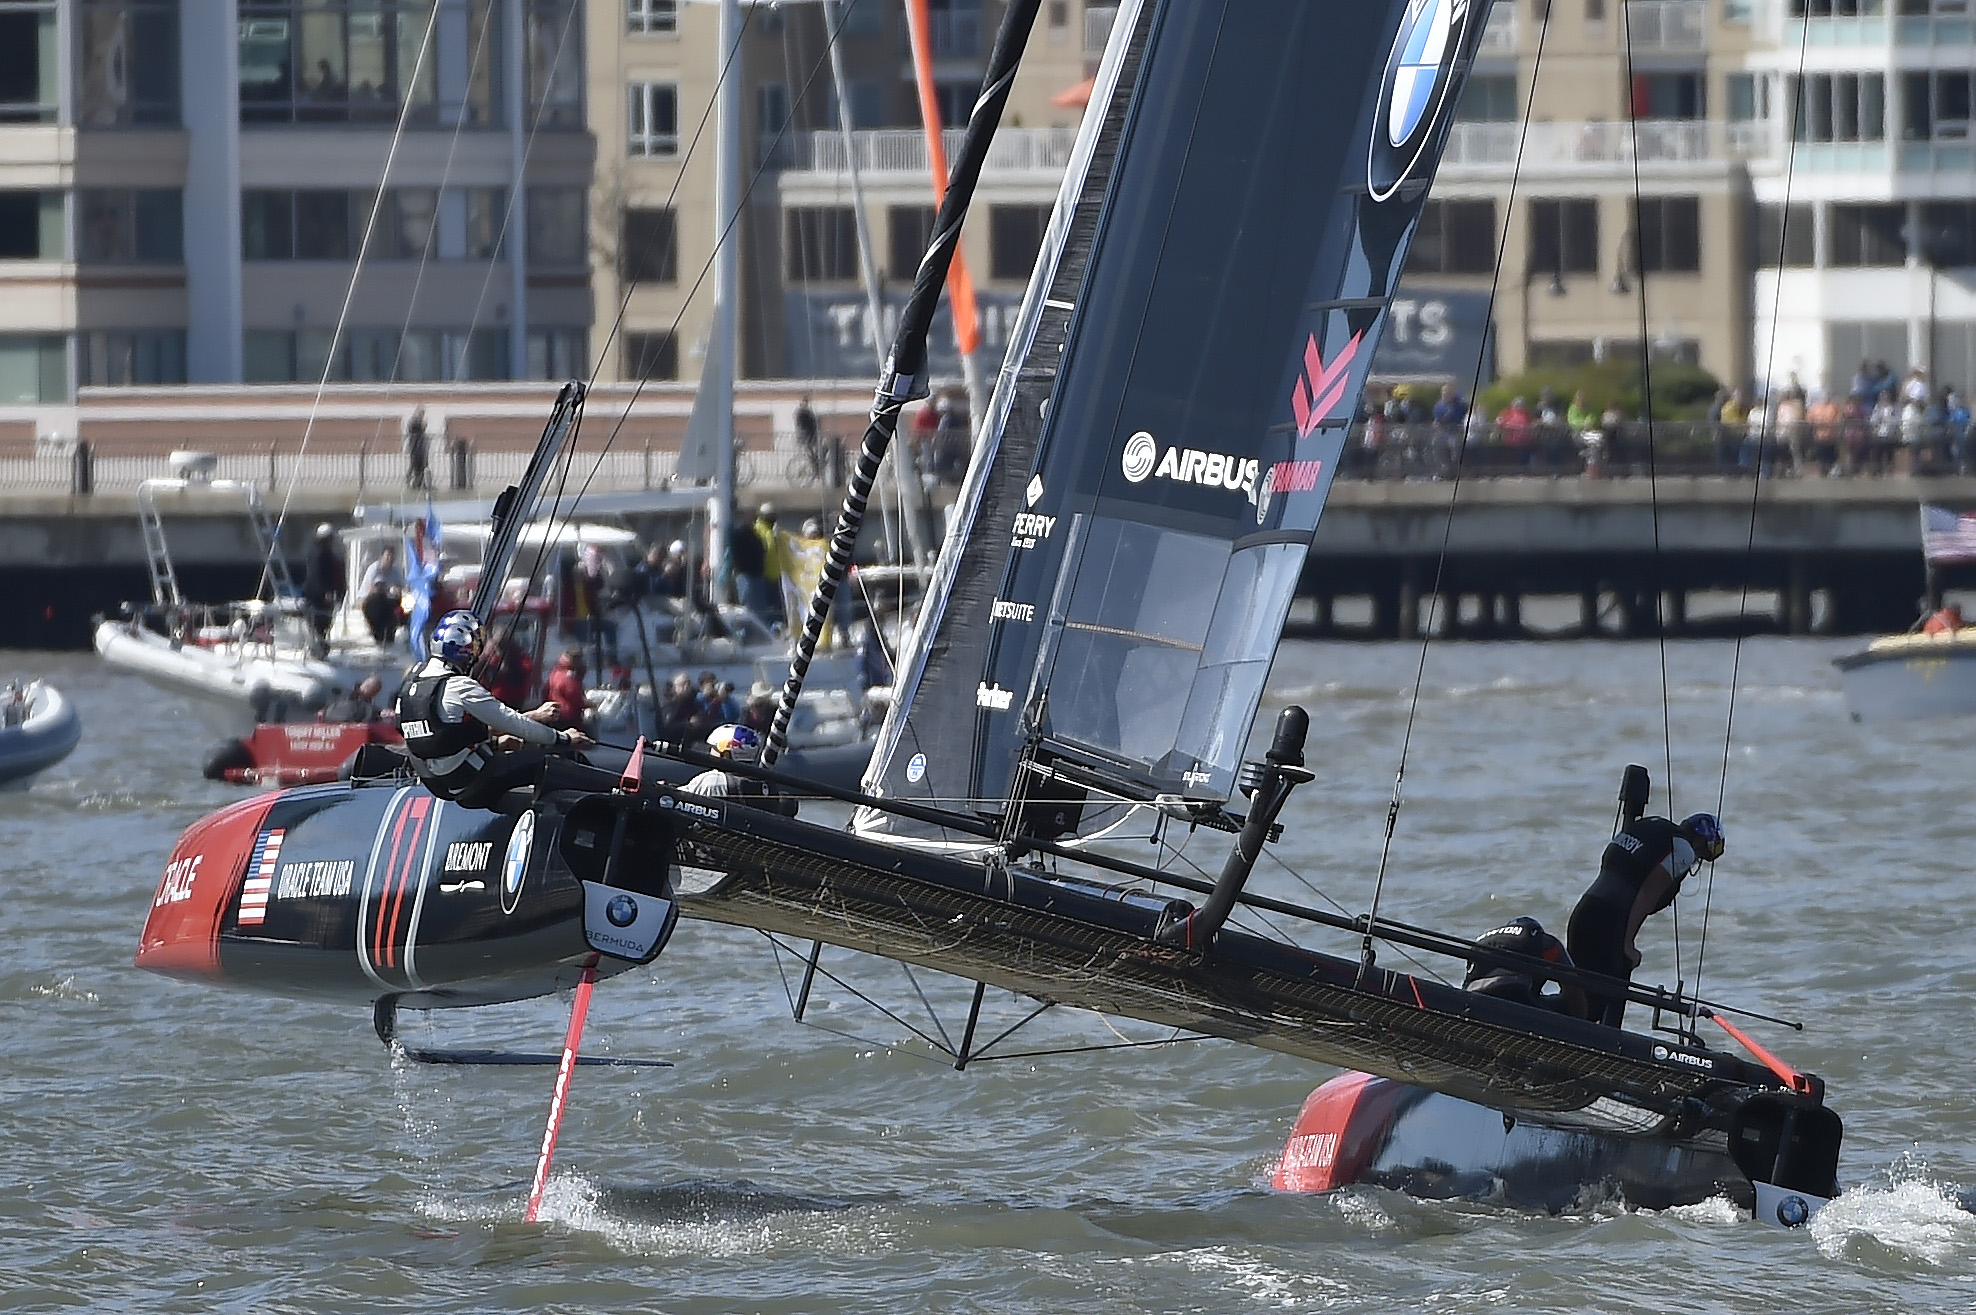 Oracle Team USA skipper Jimmy Spithill leans overboard away from the rigid sailing wing during a Louis Vuitton America's Cup World Series preliminary race in New York City. Photo by David Tulis.                                                                                   